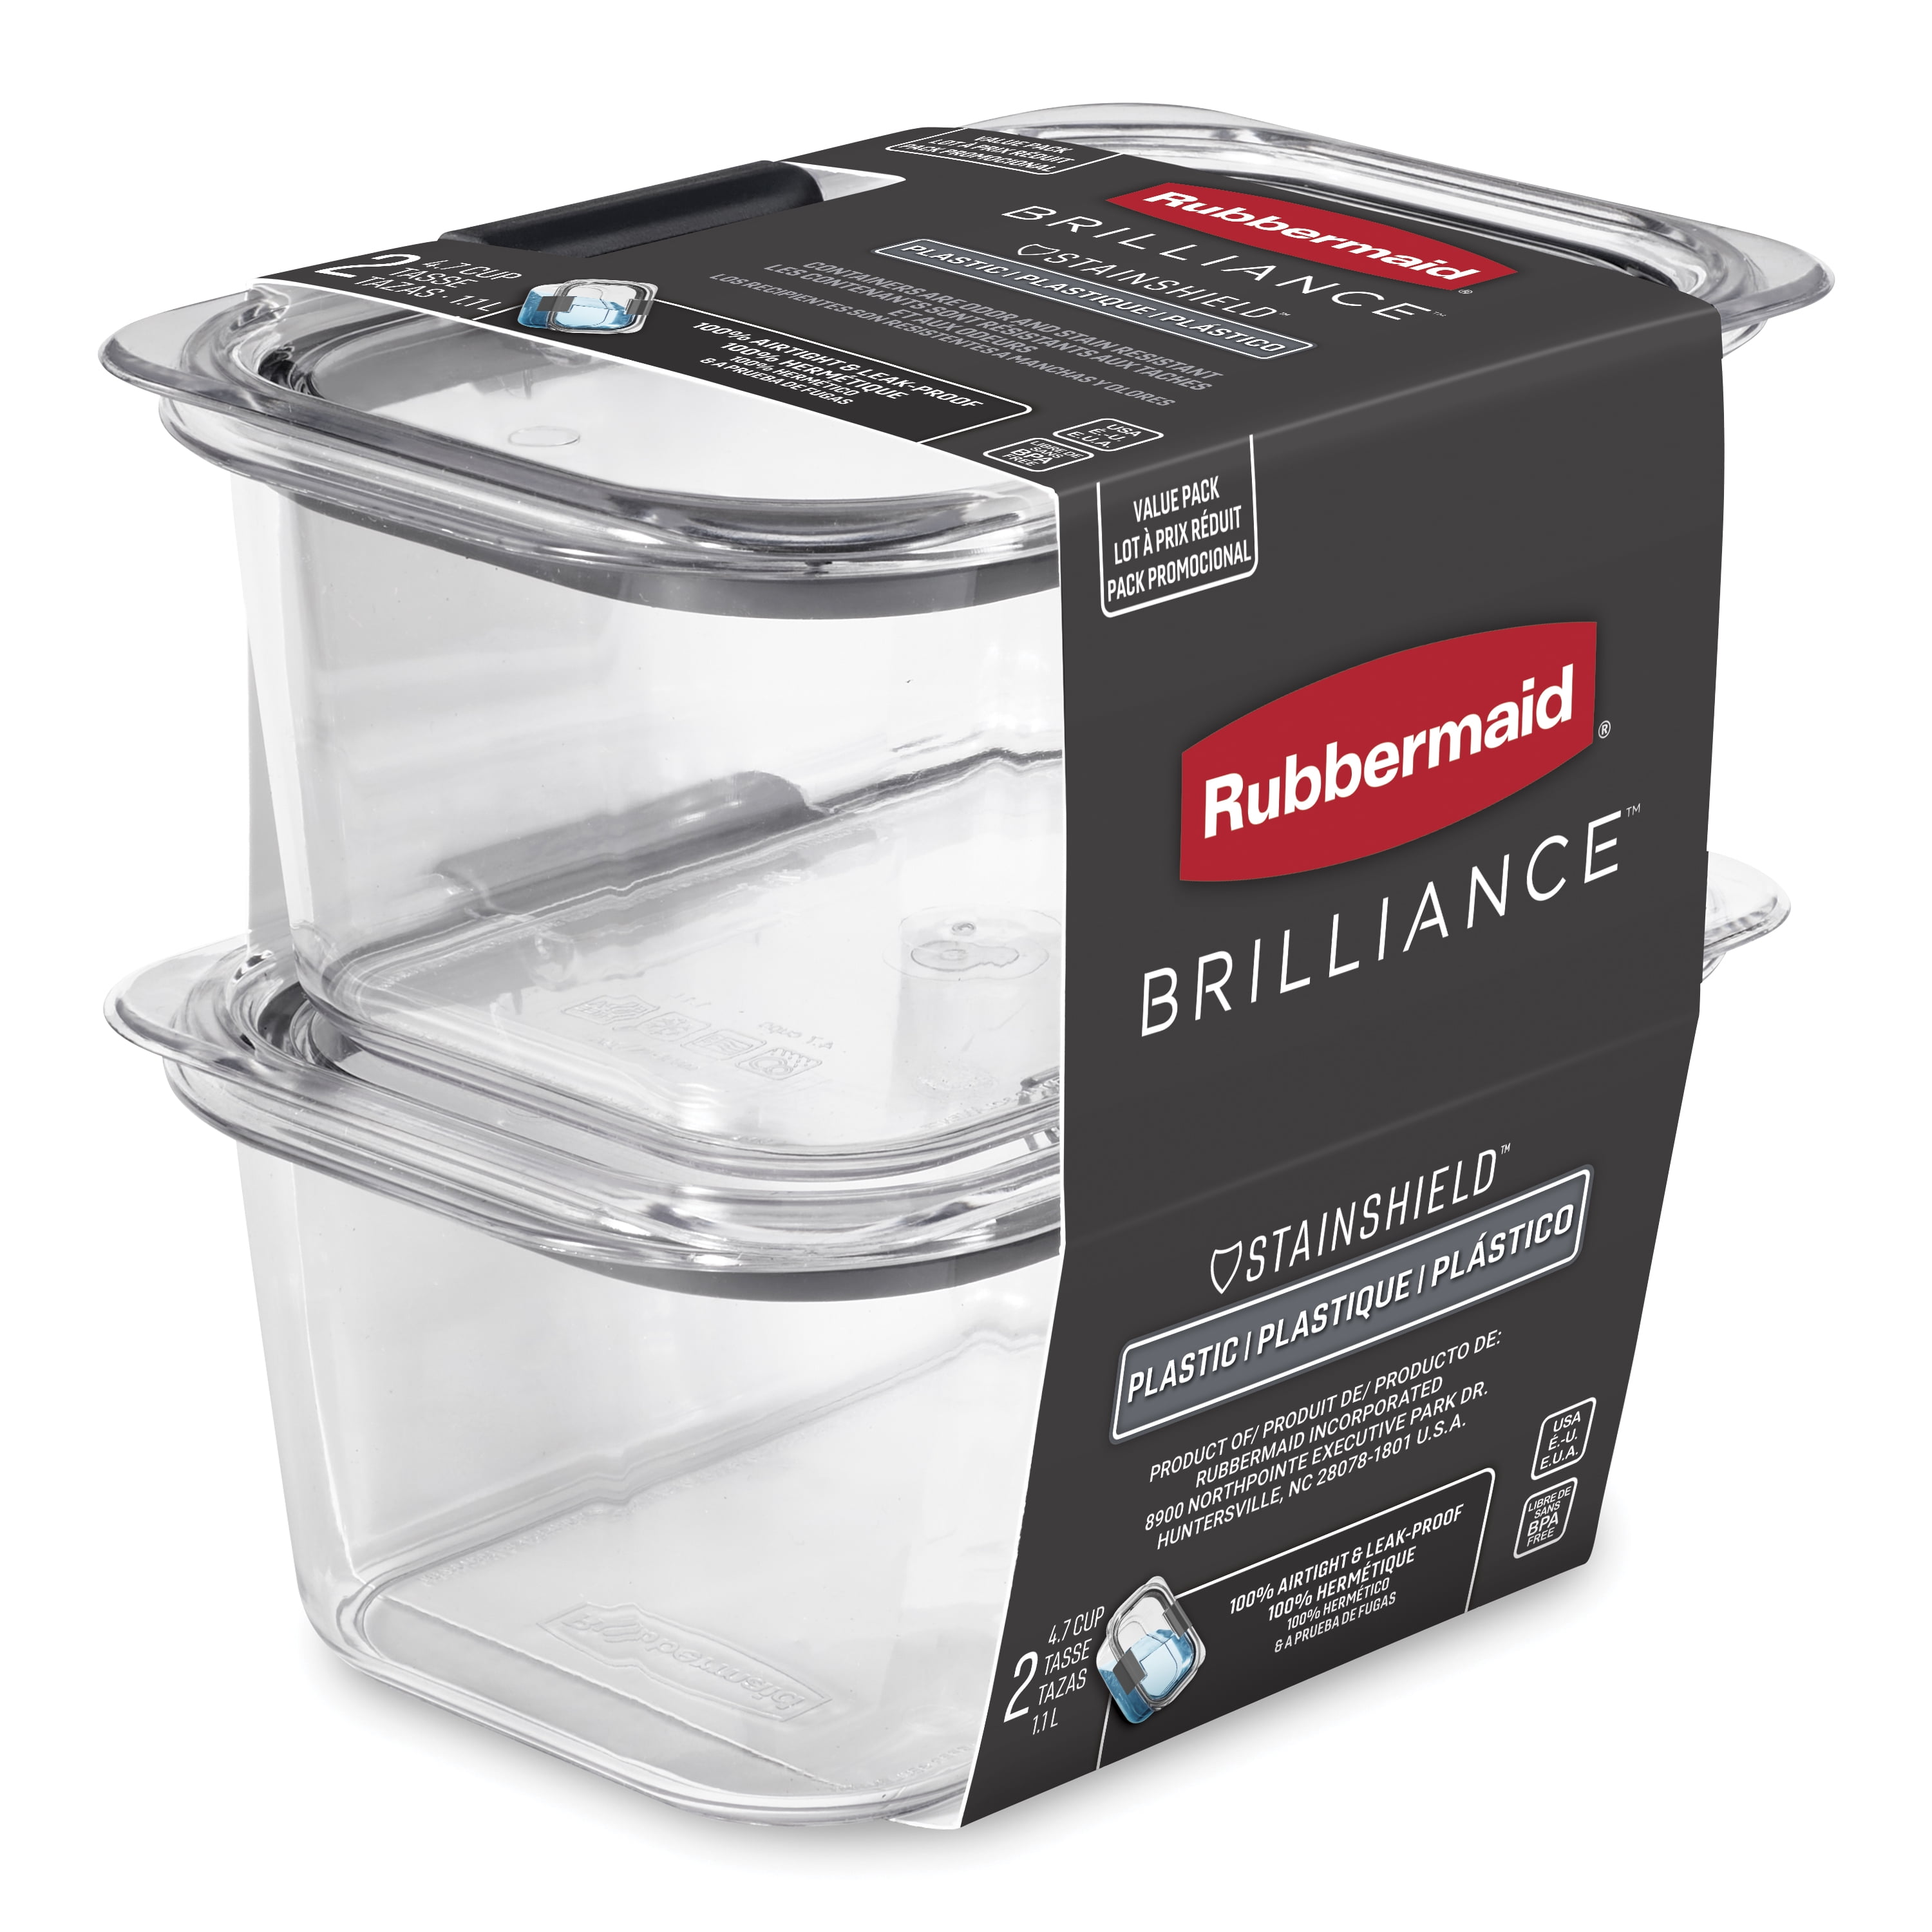  Rubbermaid Brilliance Glass Storage 4.7-Cup Food